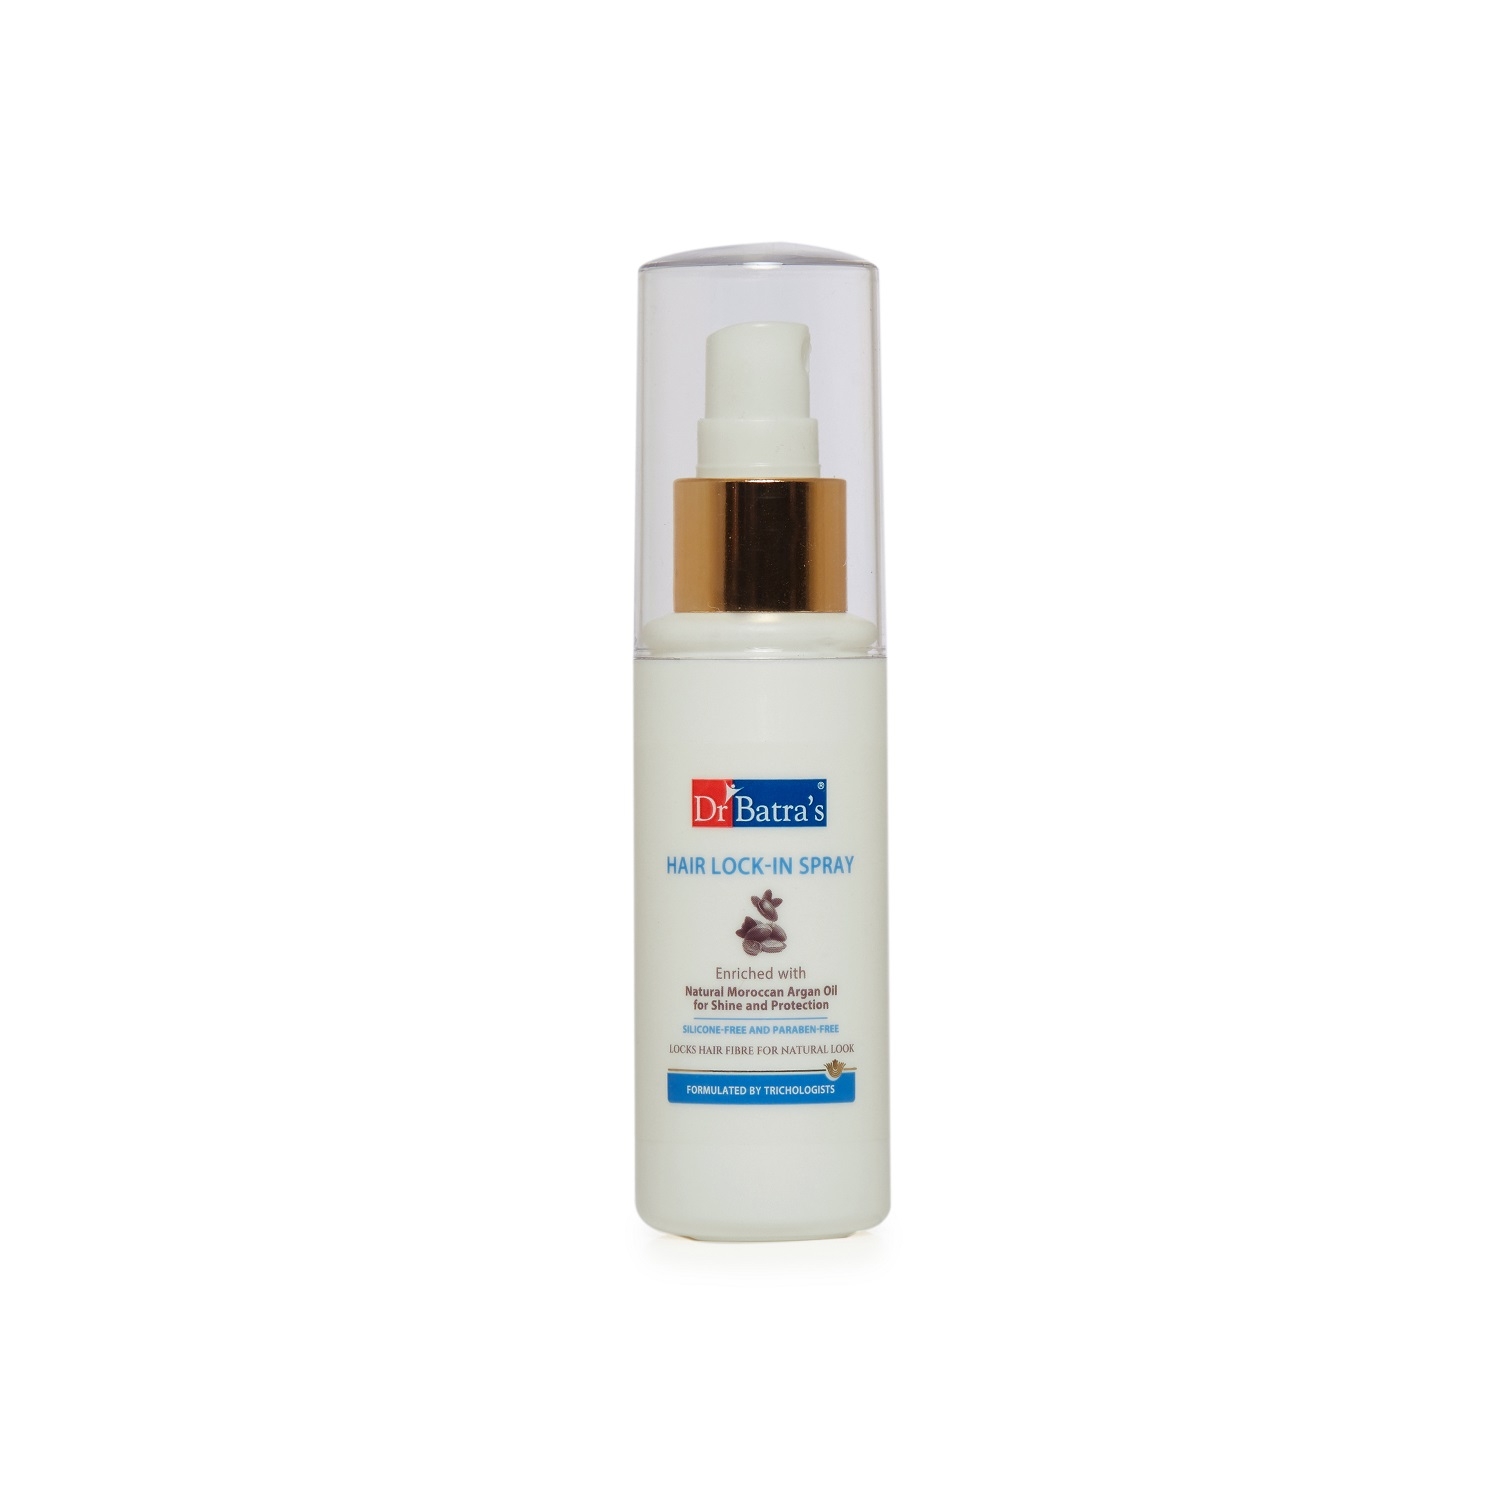 Dr Batra's | Dr Batra's PRO+ Lock-In Spray - 50 ml | Enriched with Natural Argan oil  | Silicone-Free and Paraben-Free